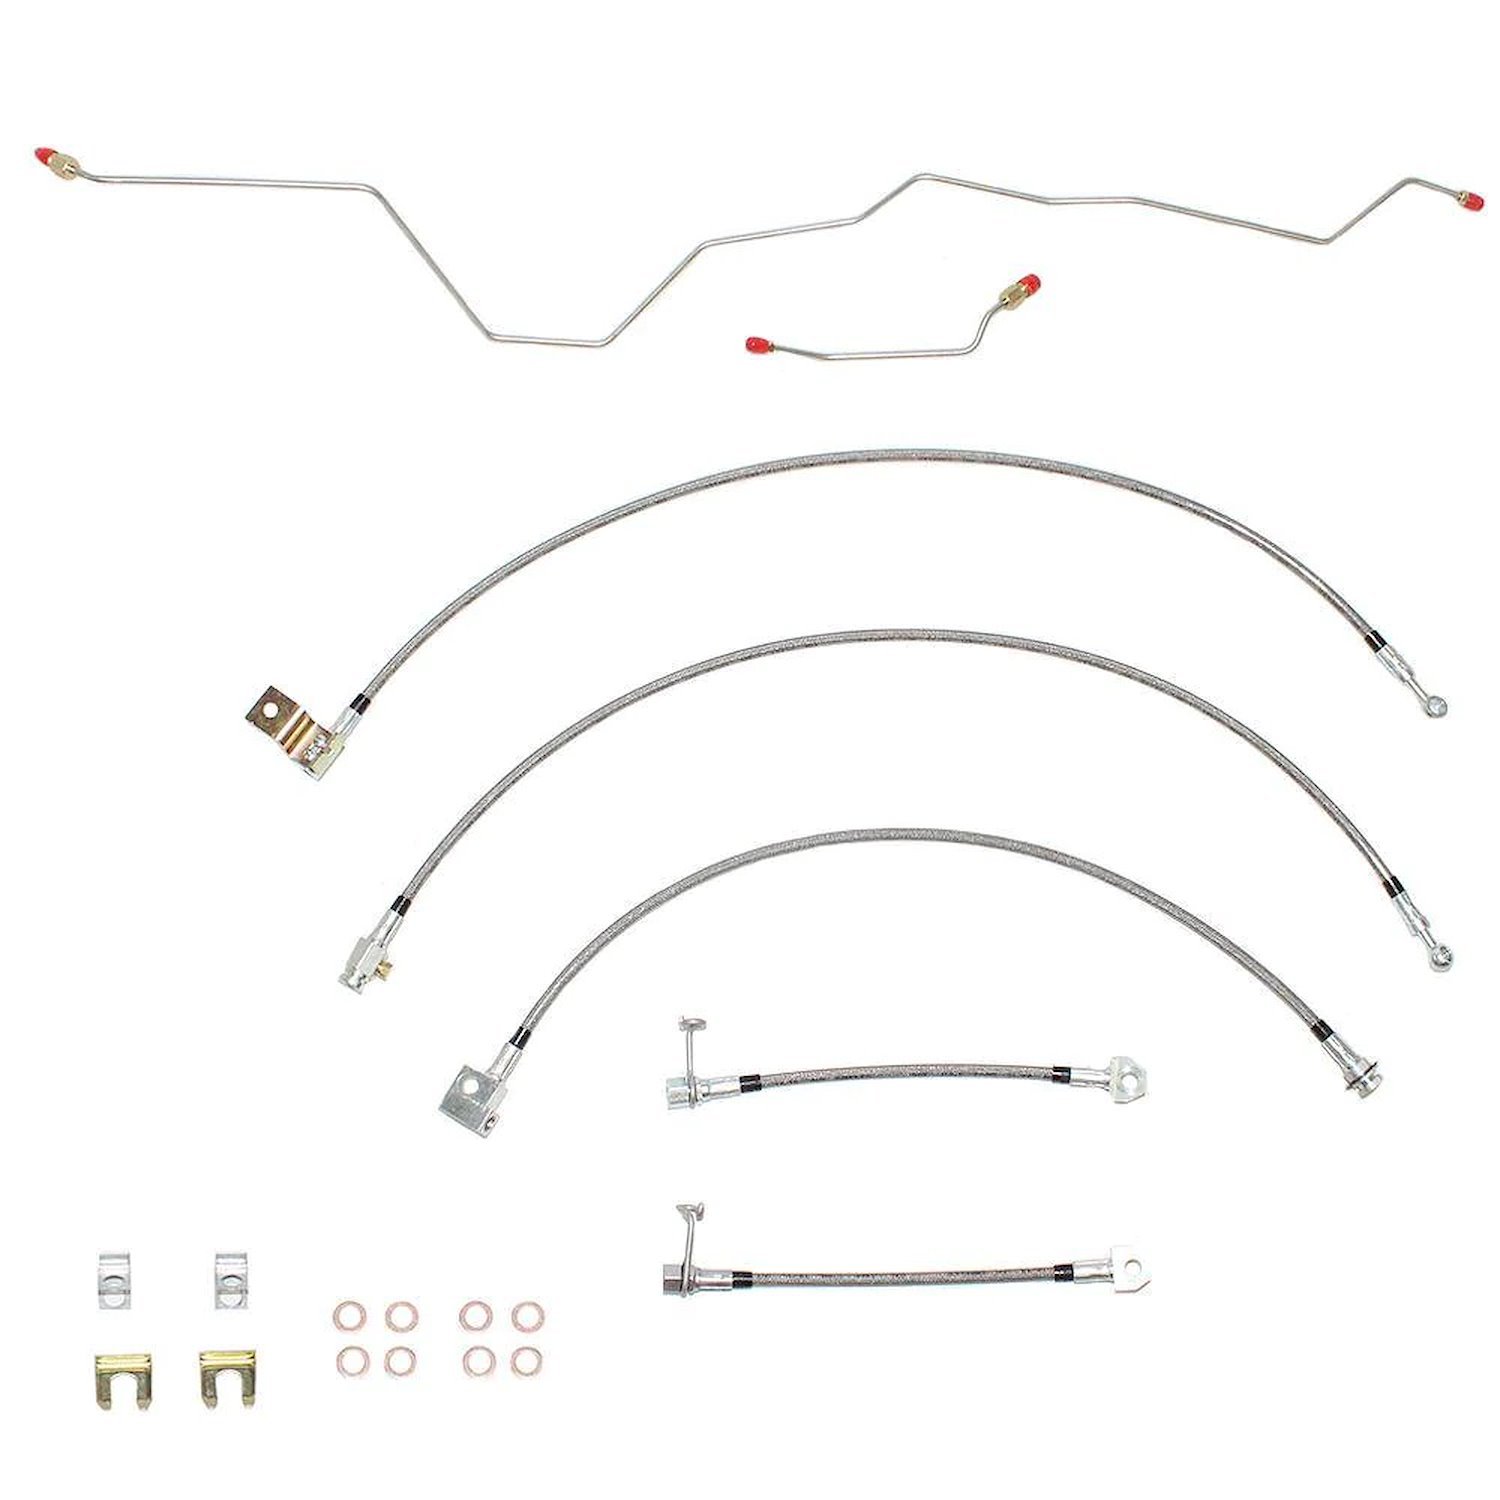 Complete Brake Hose Kit 2001-2002 Dodge Ram 2500/3500 4wd w/Rear Disc/Automatic Trans [Braided Stainless]